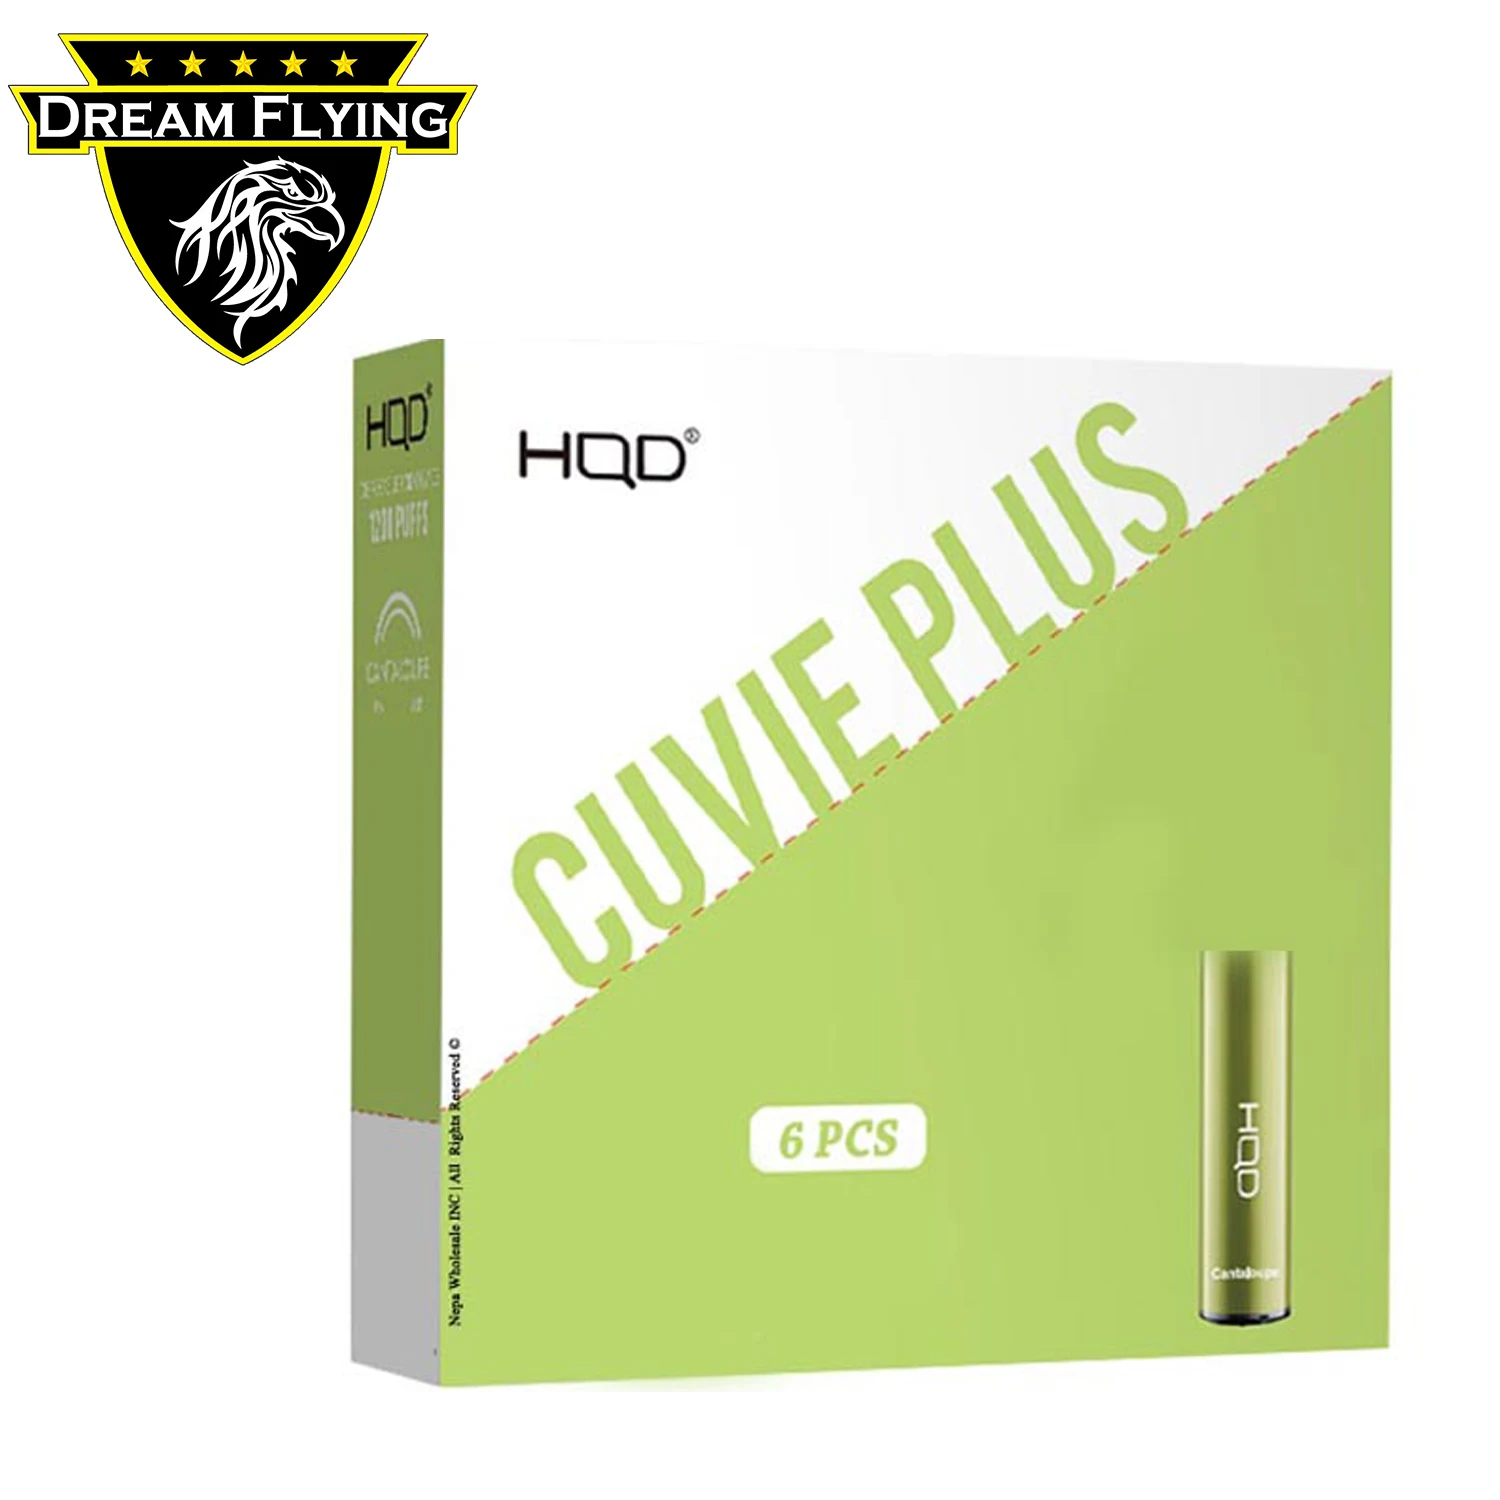 100% authentic HQD Cuvie plus 1200 with high quality wholesale is trending product in Australia  contact us for surprise